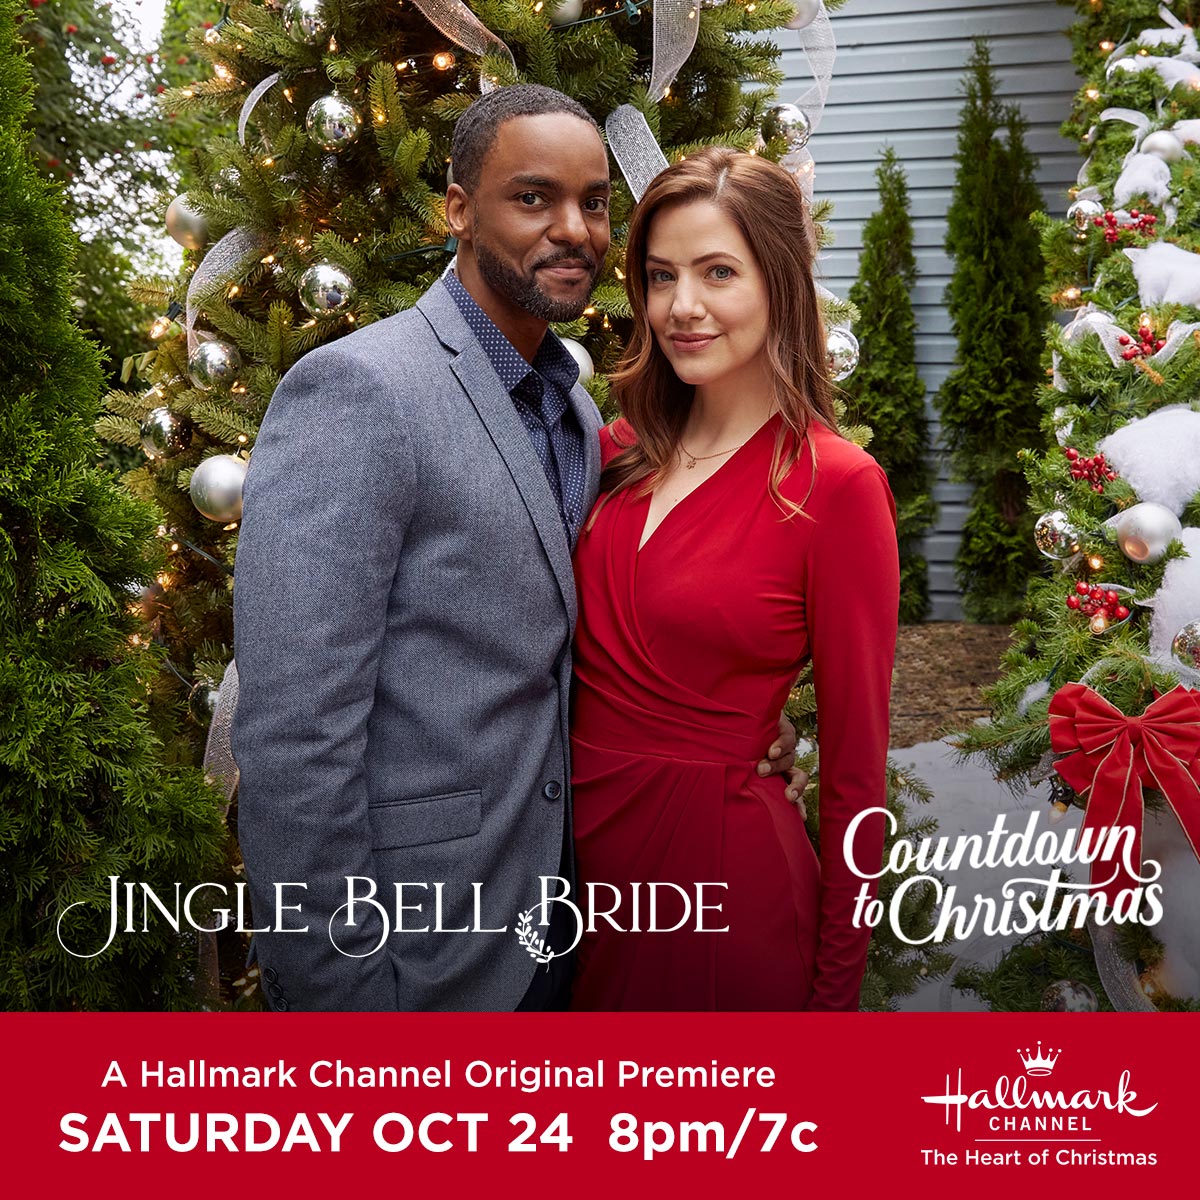 Hallmark Channel Original Premiere Of Jingle Bell Bride On Saturday Oct 24th At 8pm 7c Countdowntochristmas